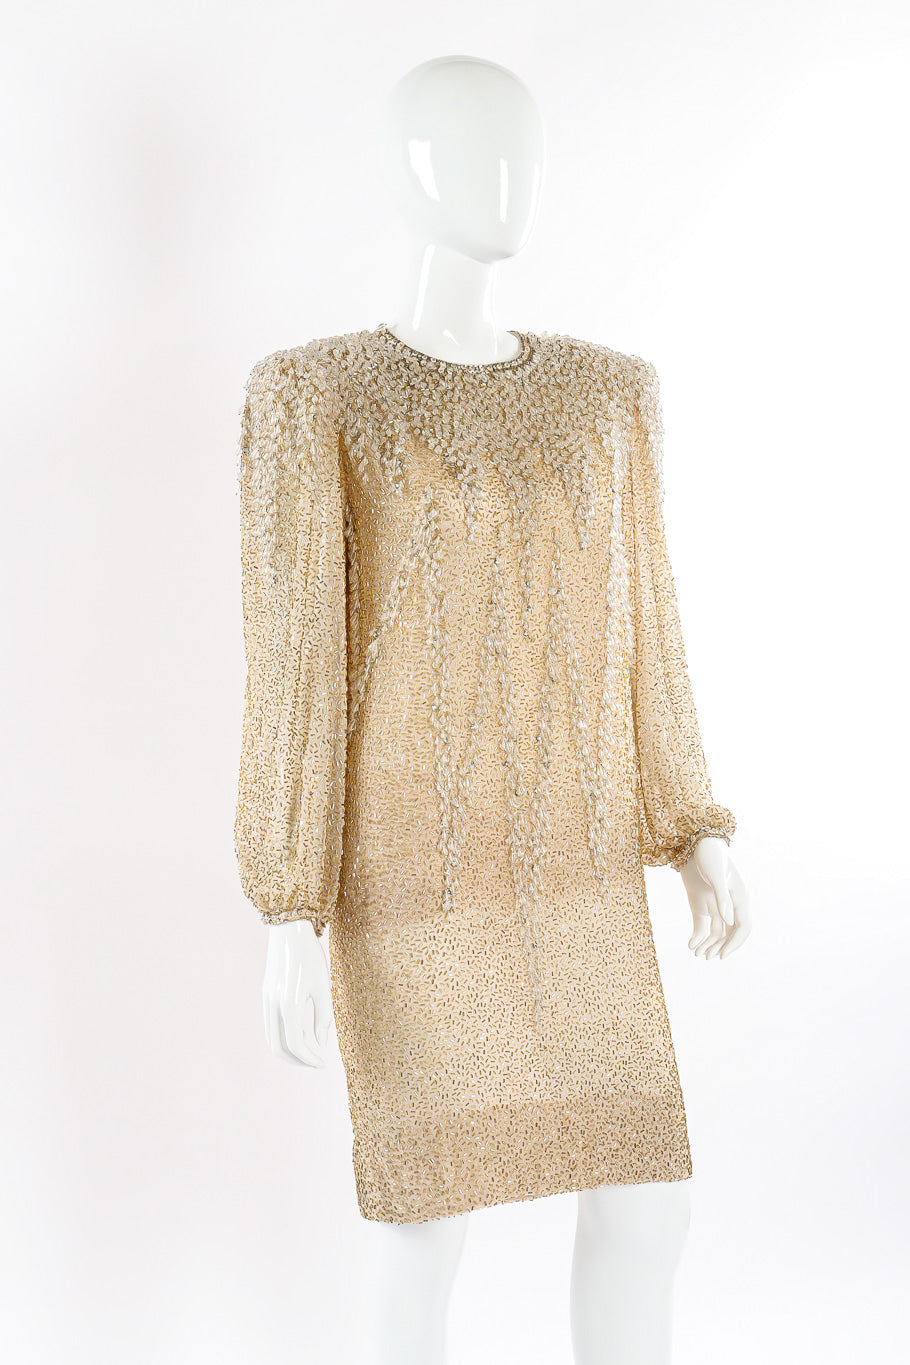 Beaded champagne silk shift dress by Victoria Royal Side View. @recessla